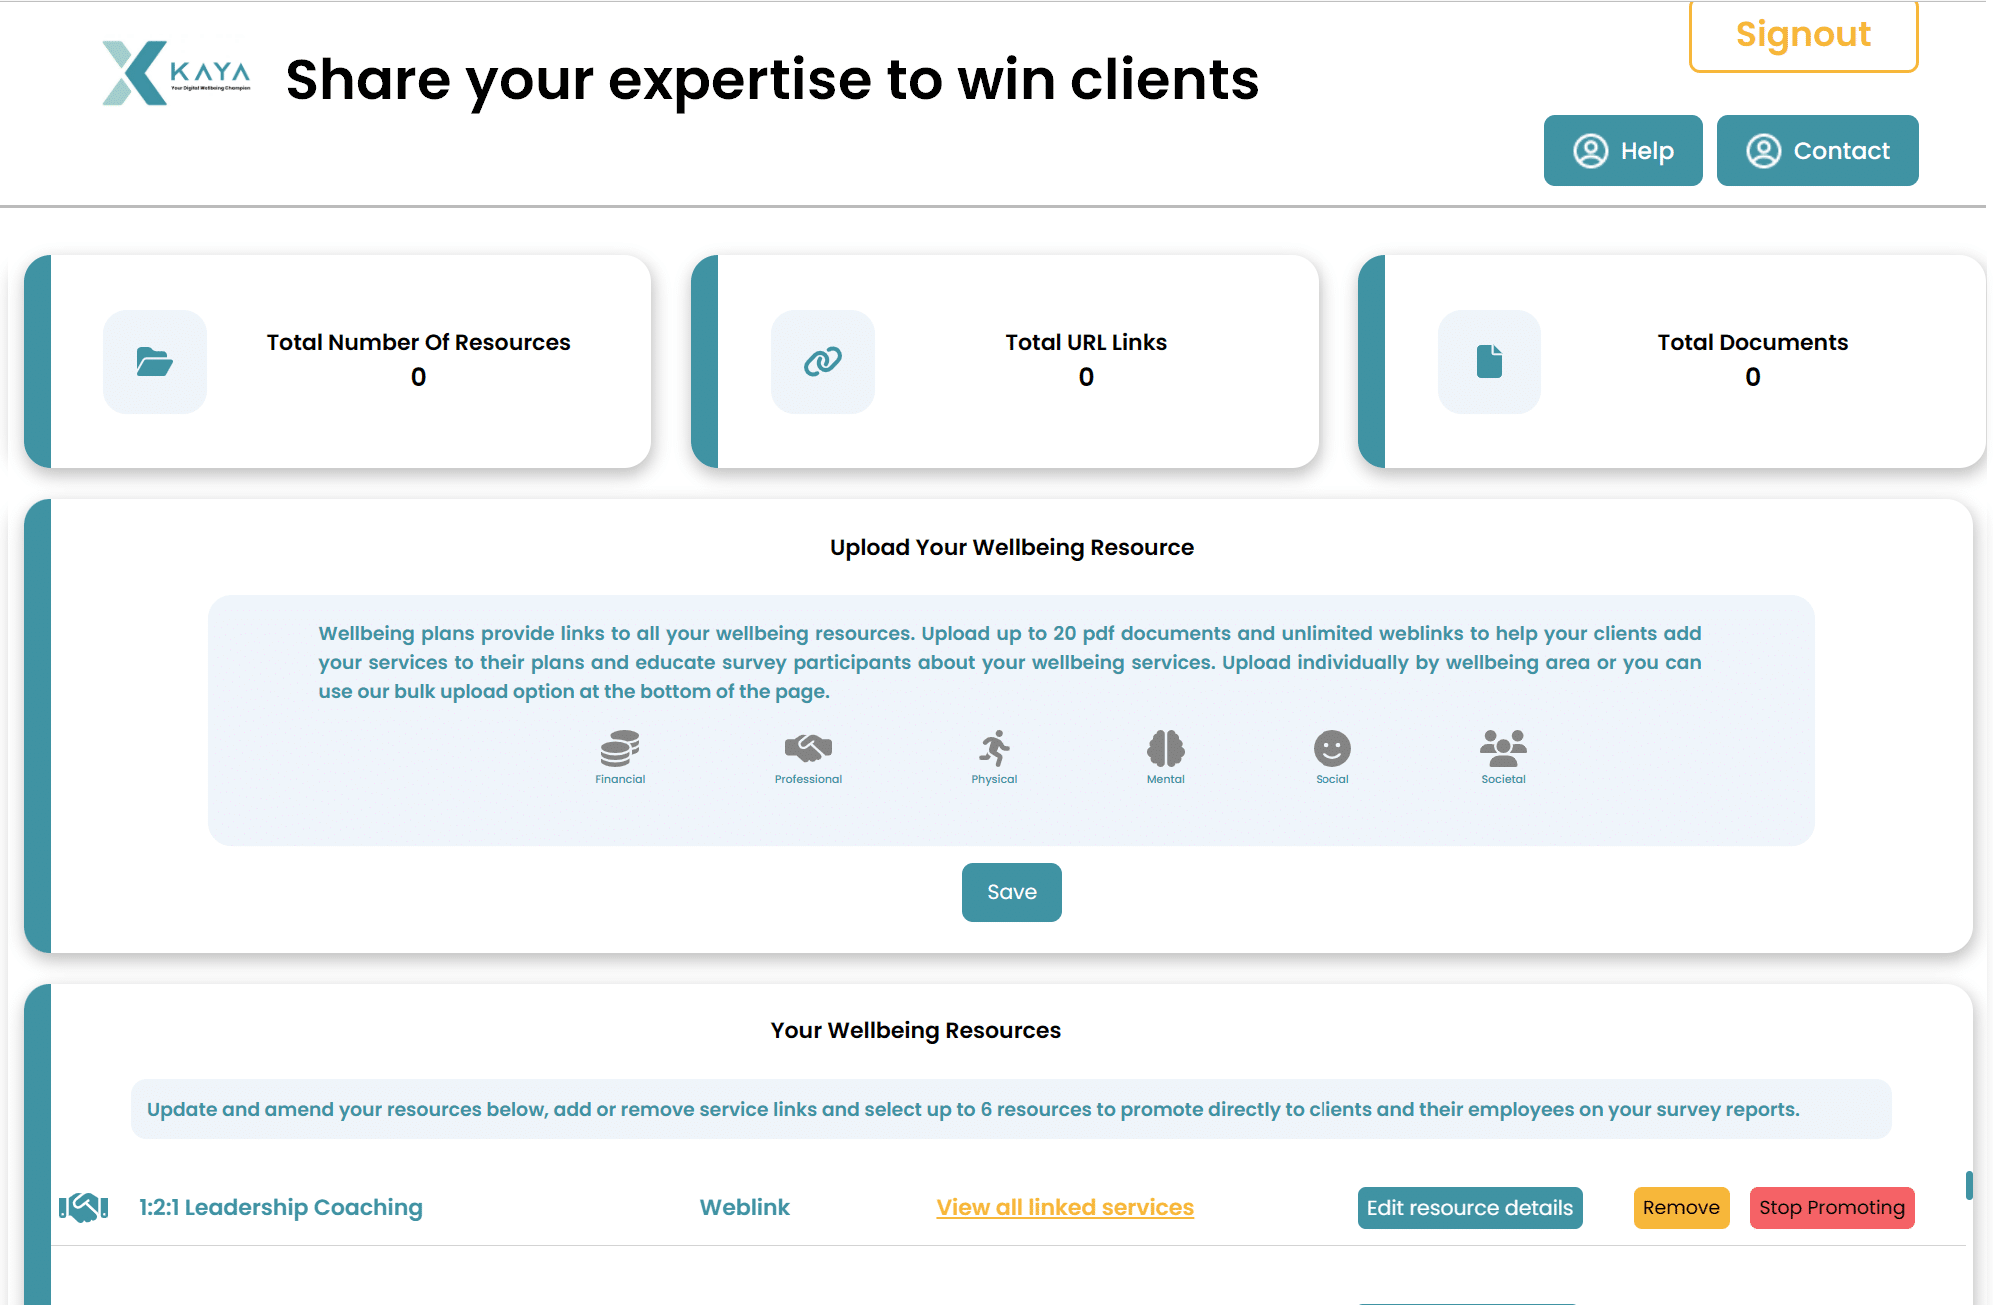 Share your expertise to win clients